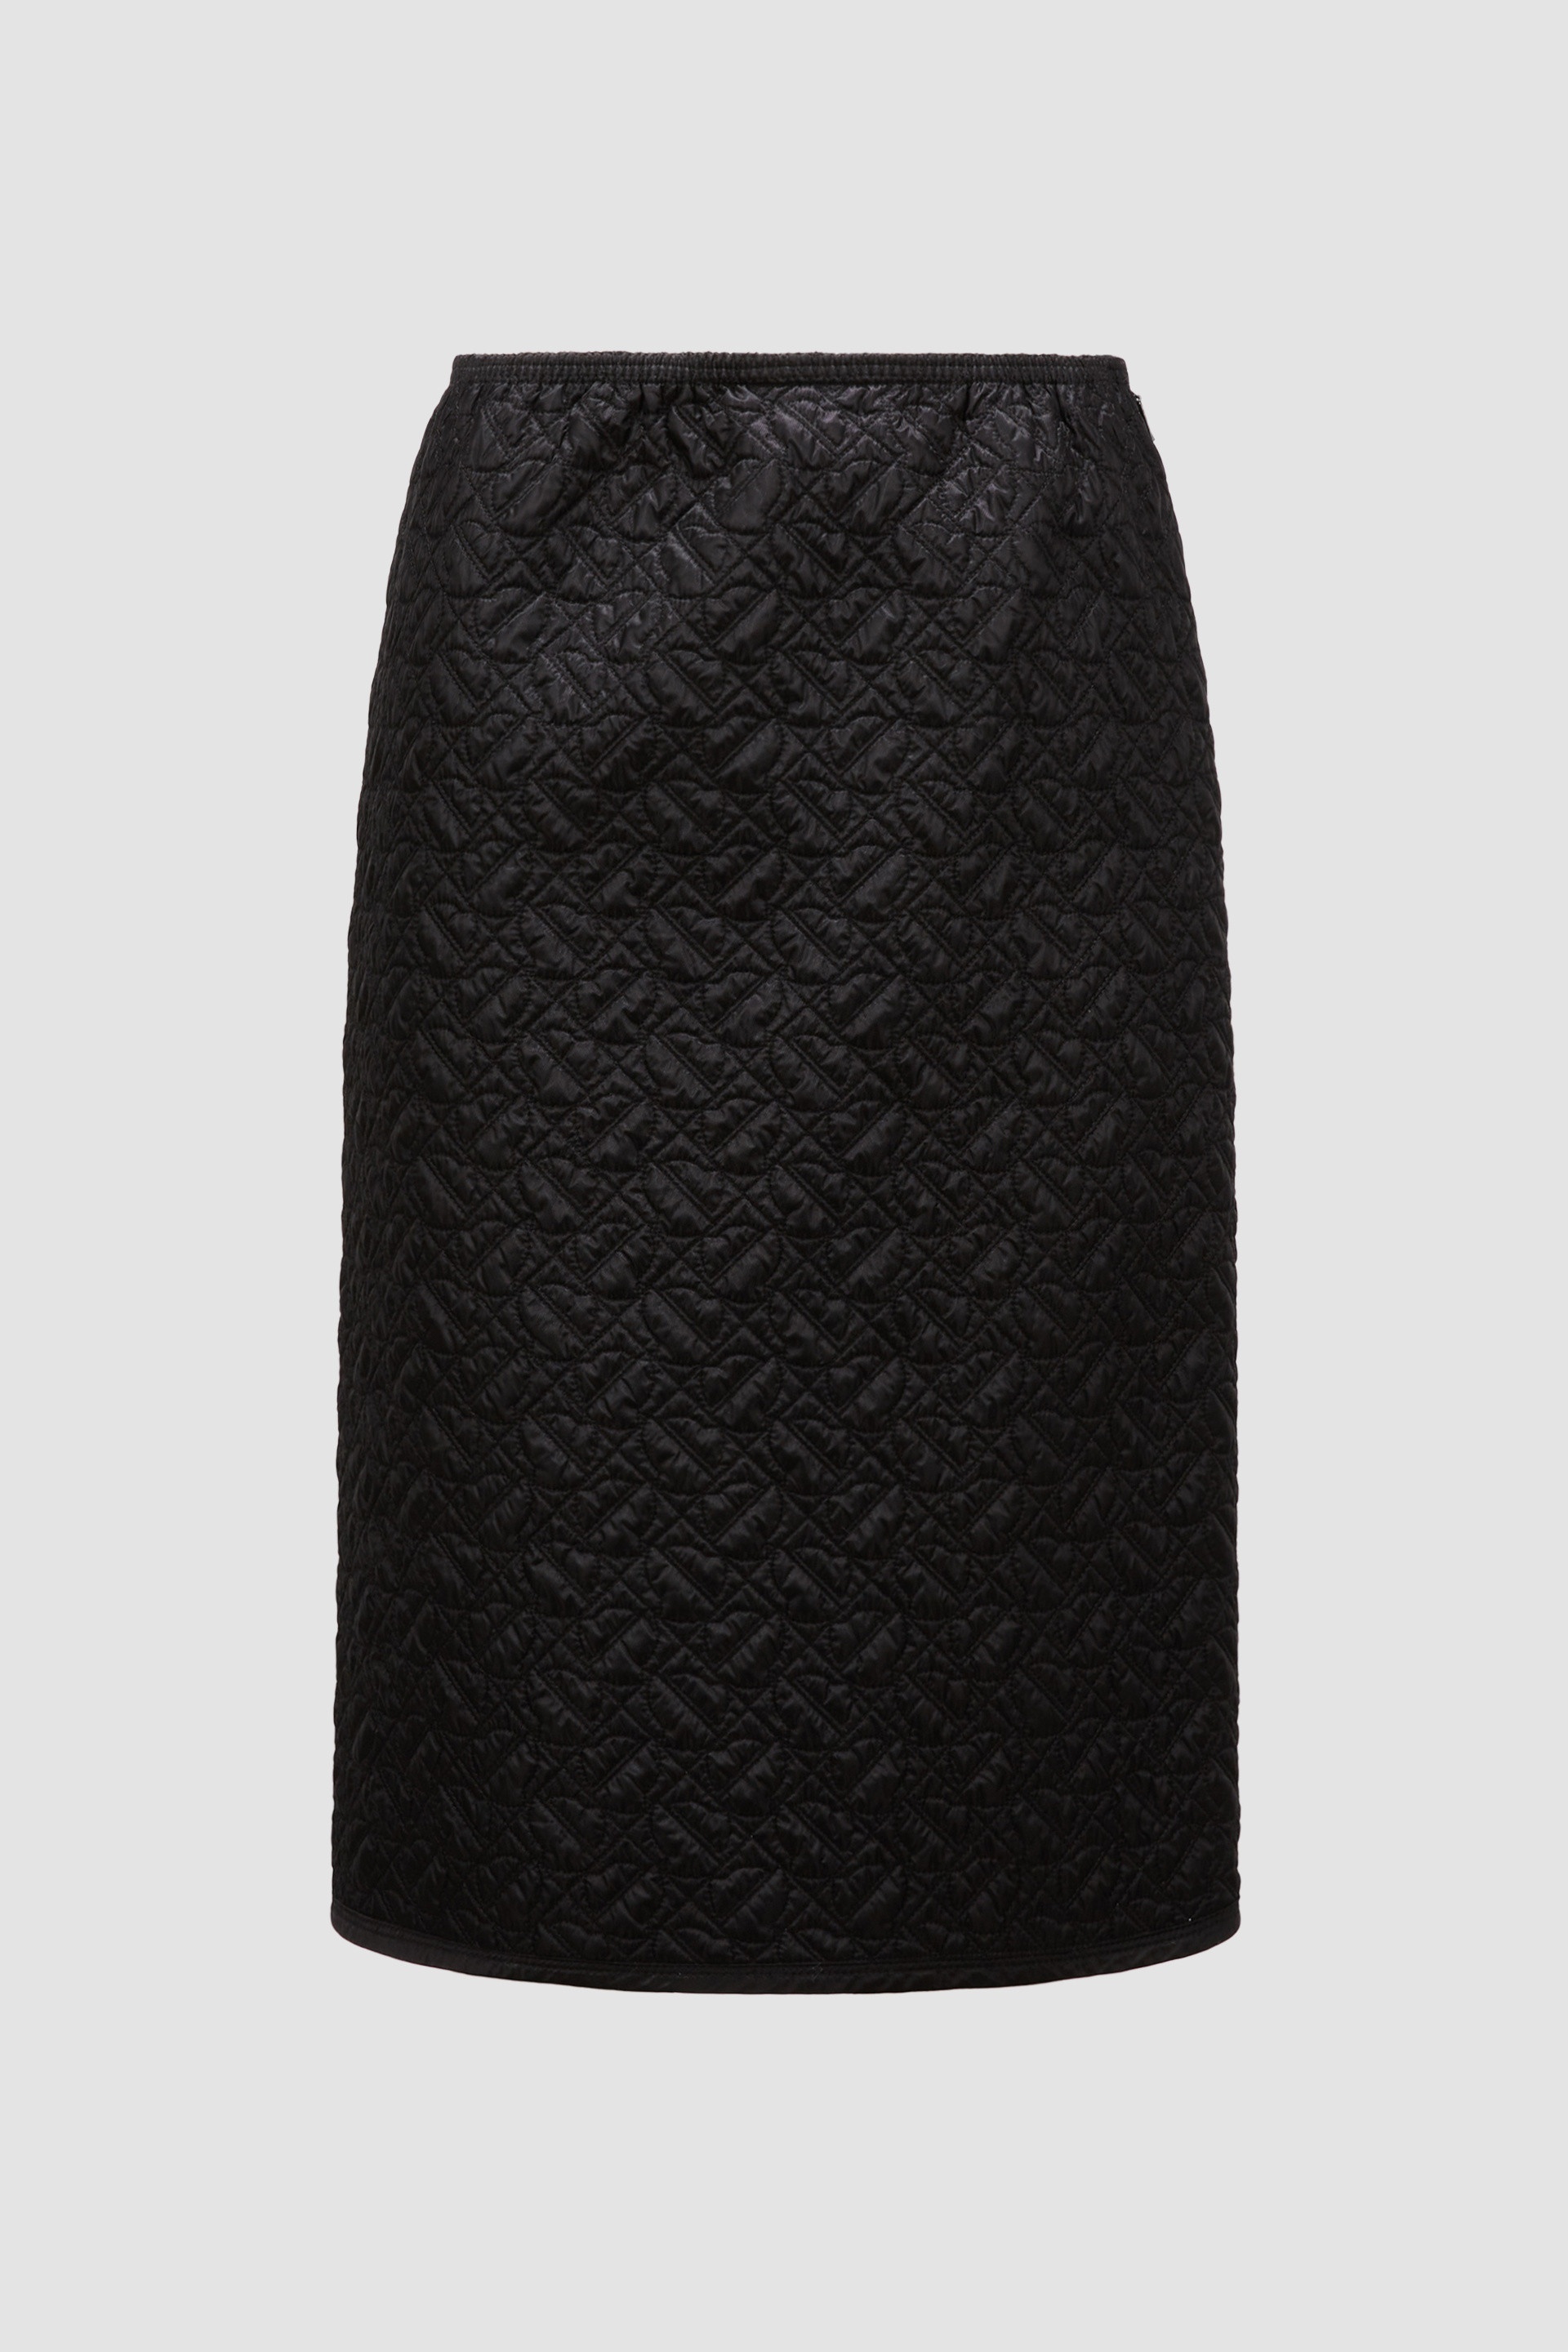 Quilted Pencil Skirt - 1